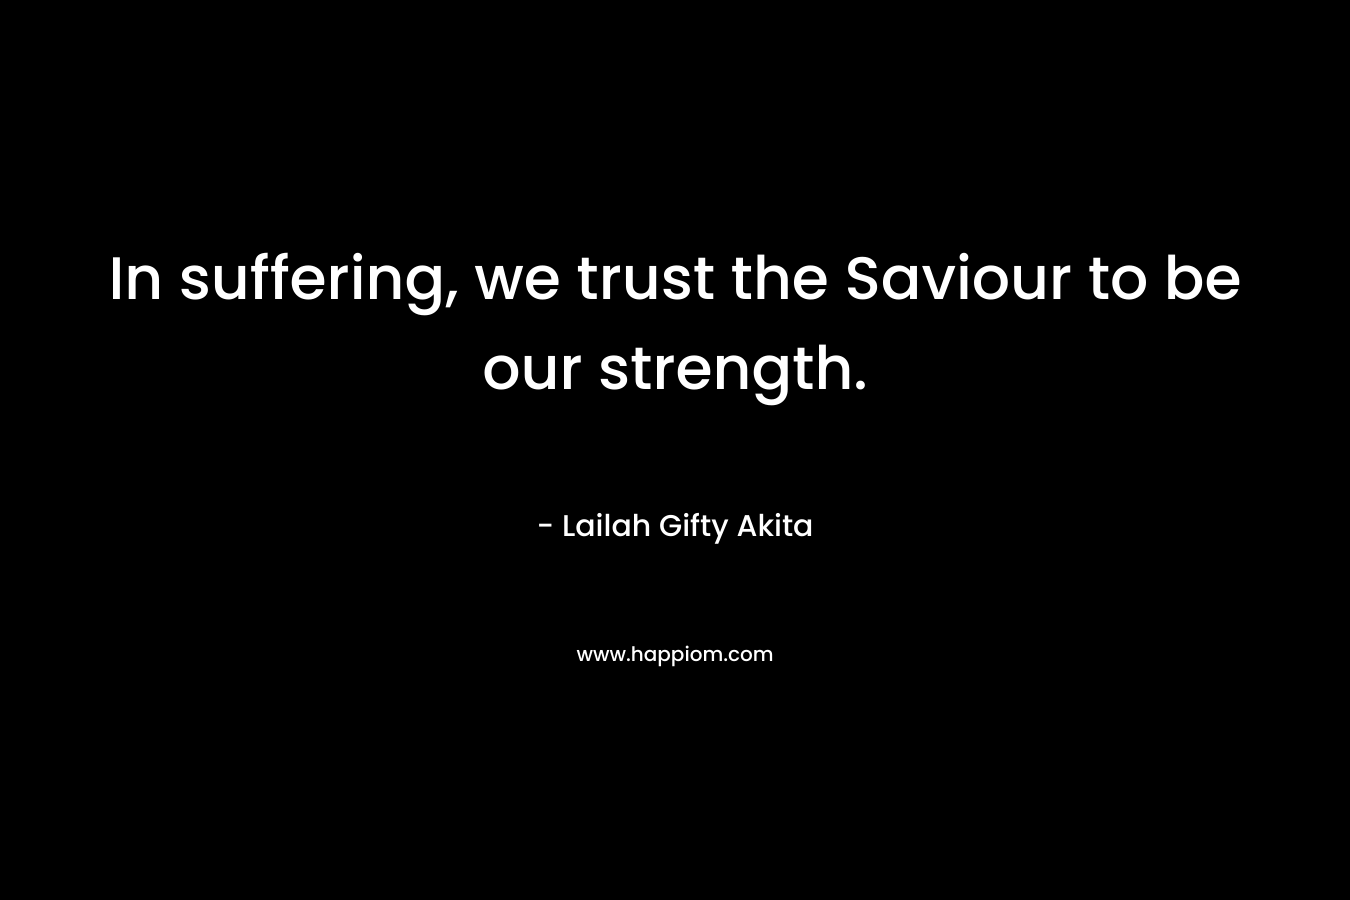 In suffering, we trust the Saviour to be our strength.